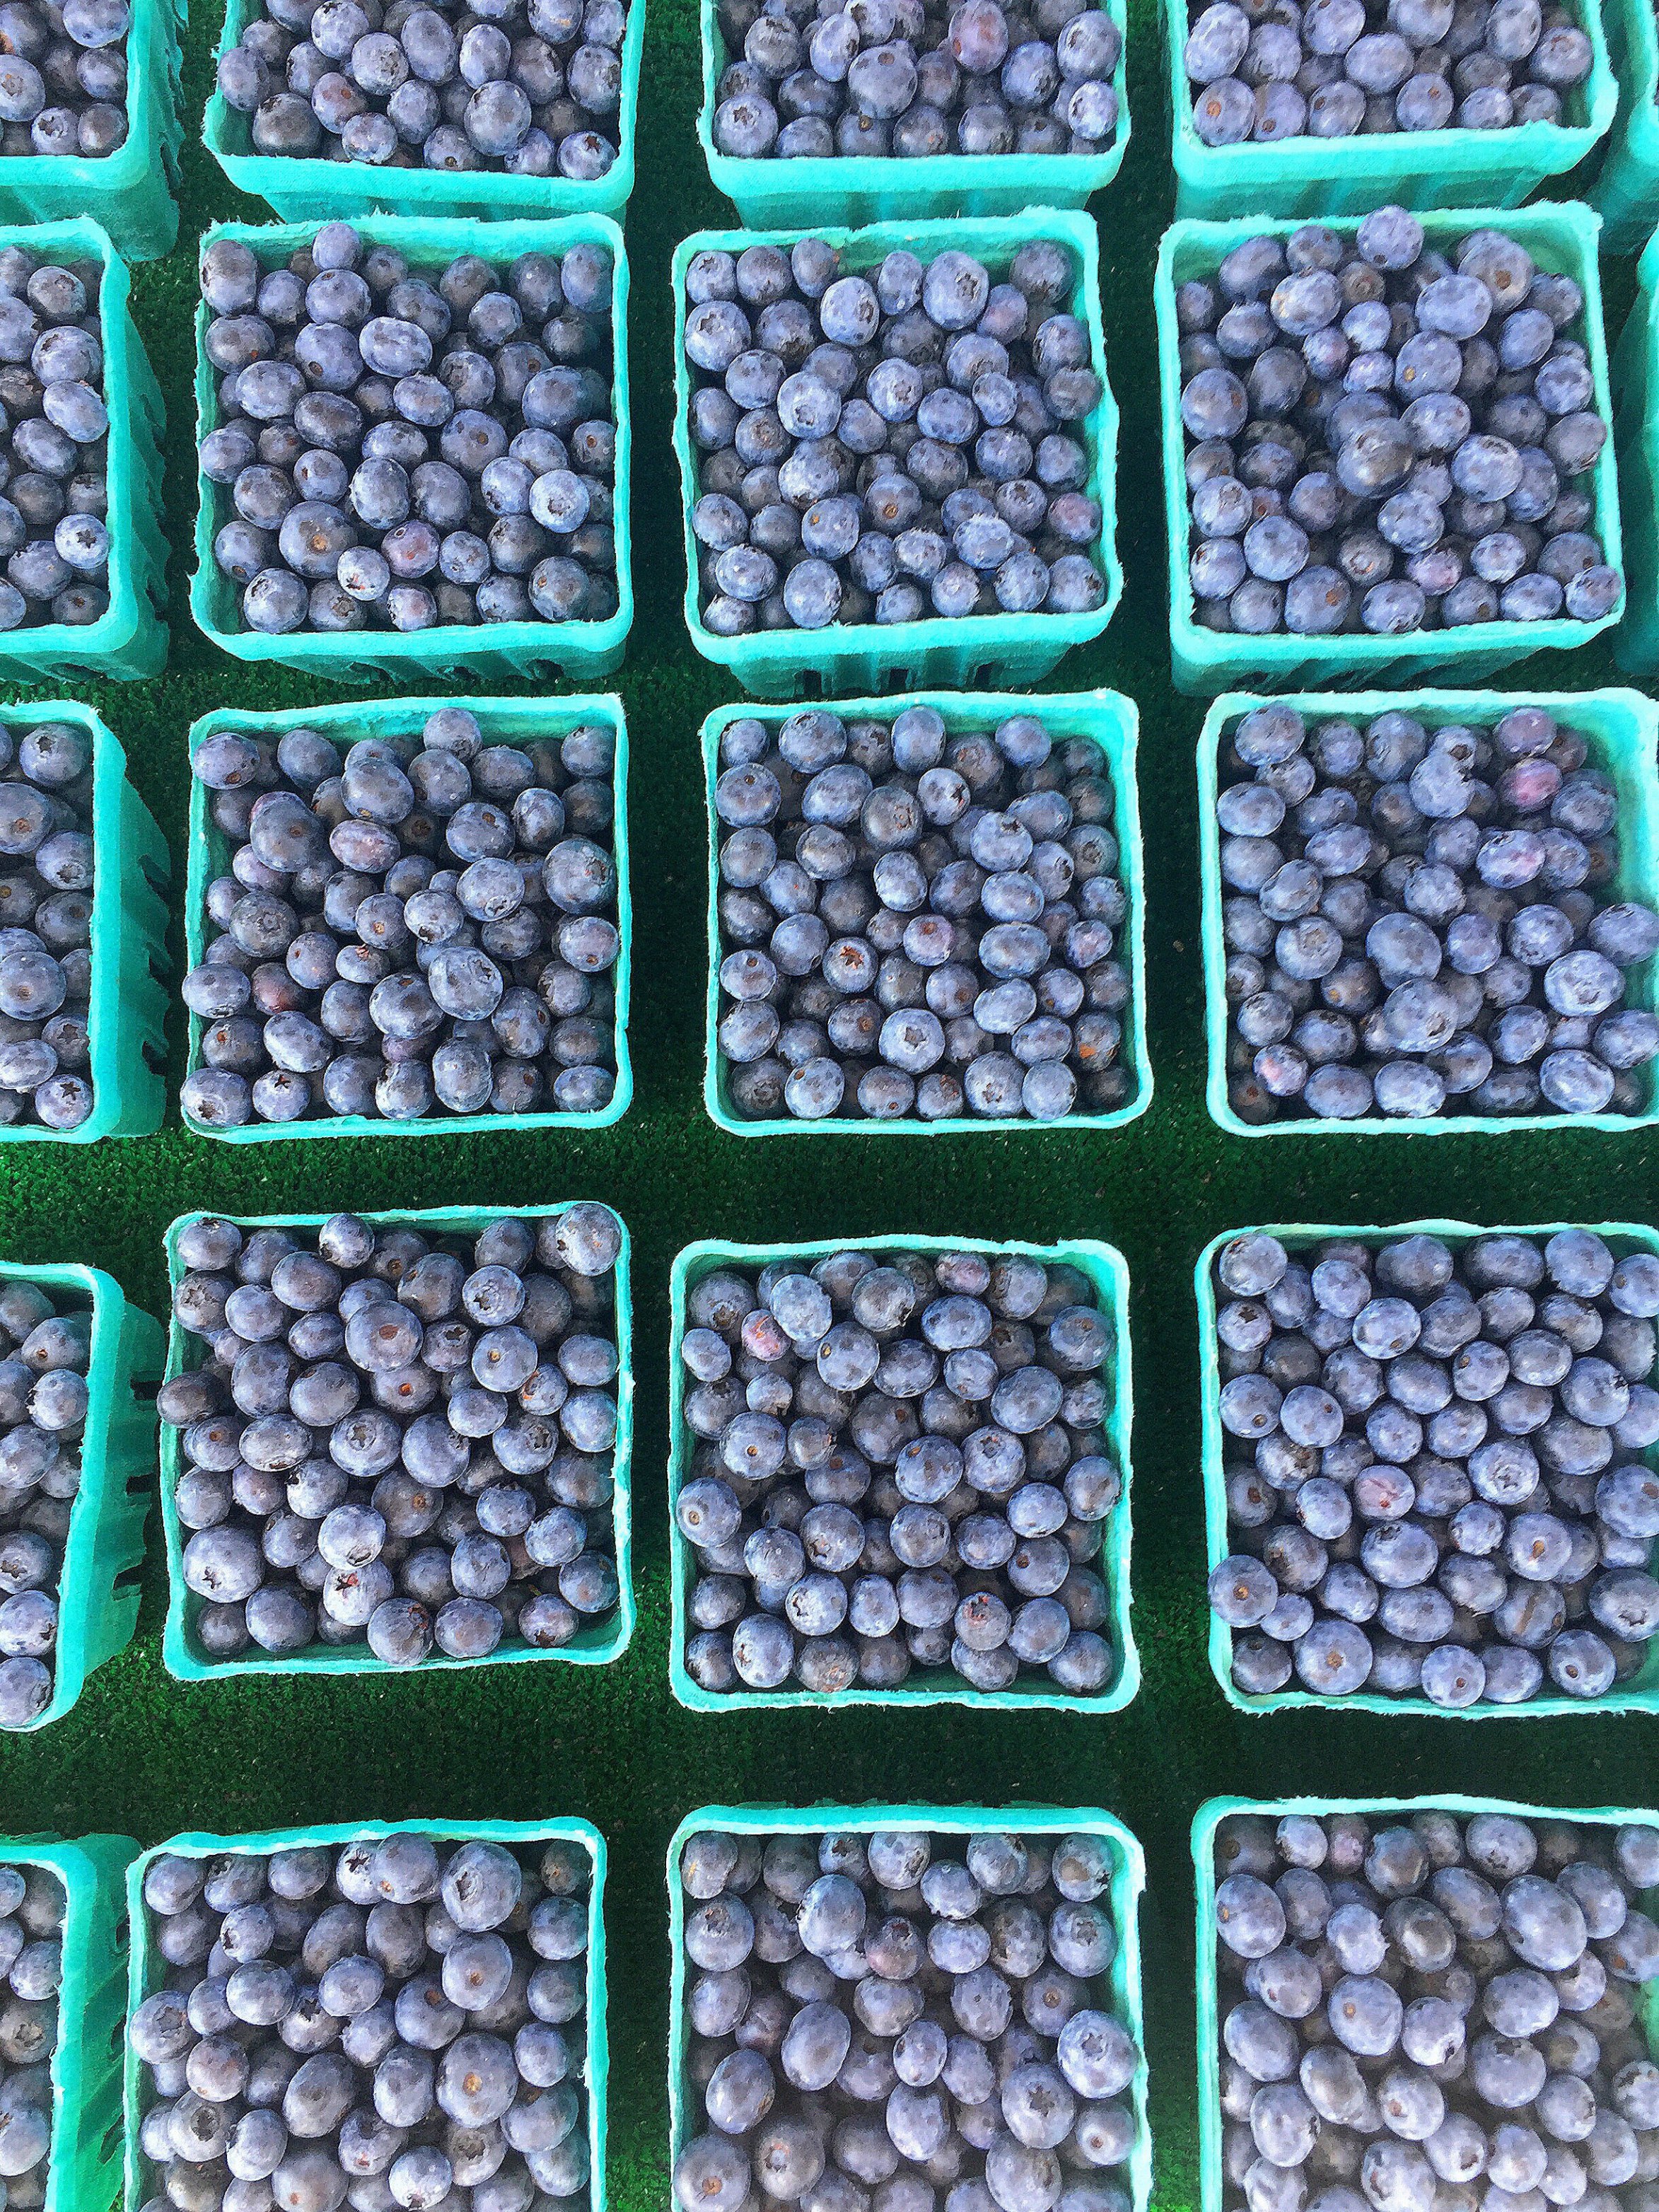 blueberries at holland farmers market in michigan